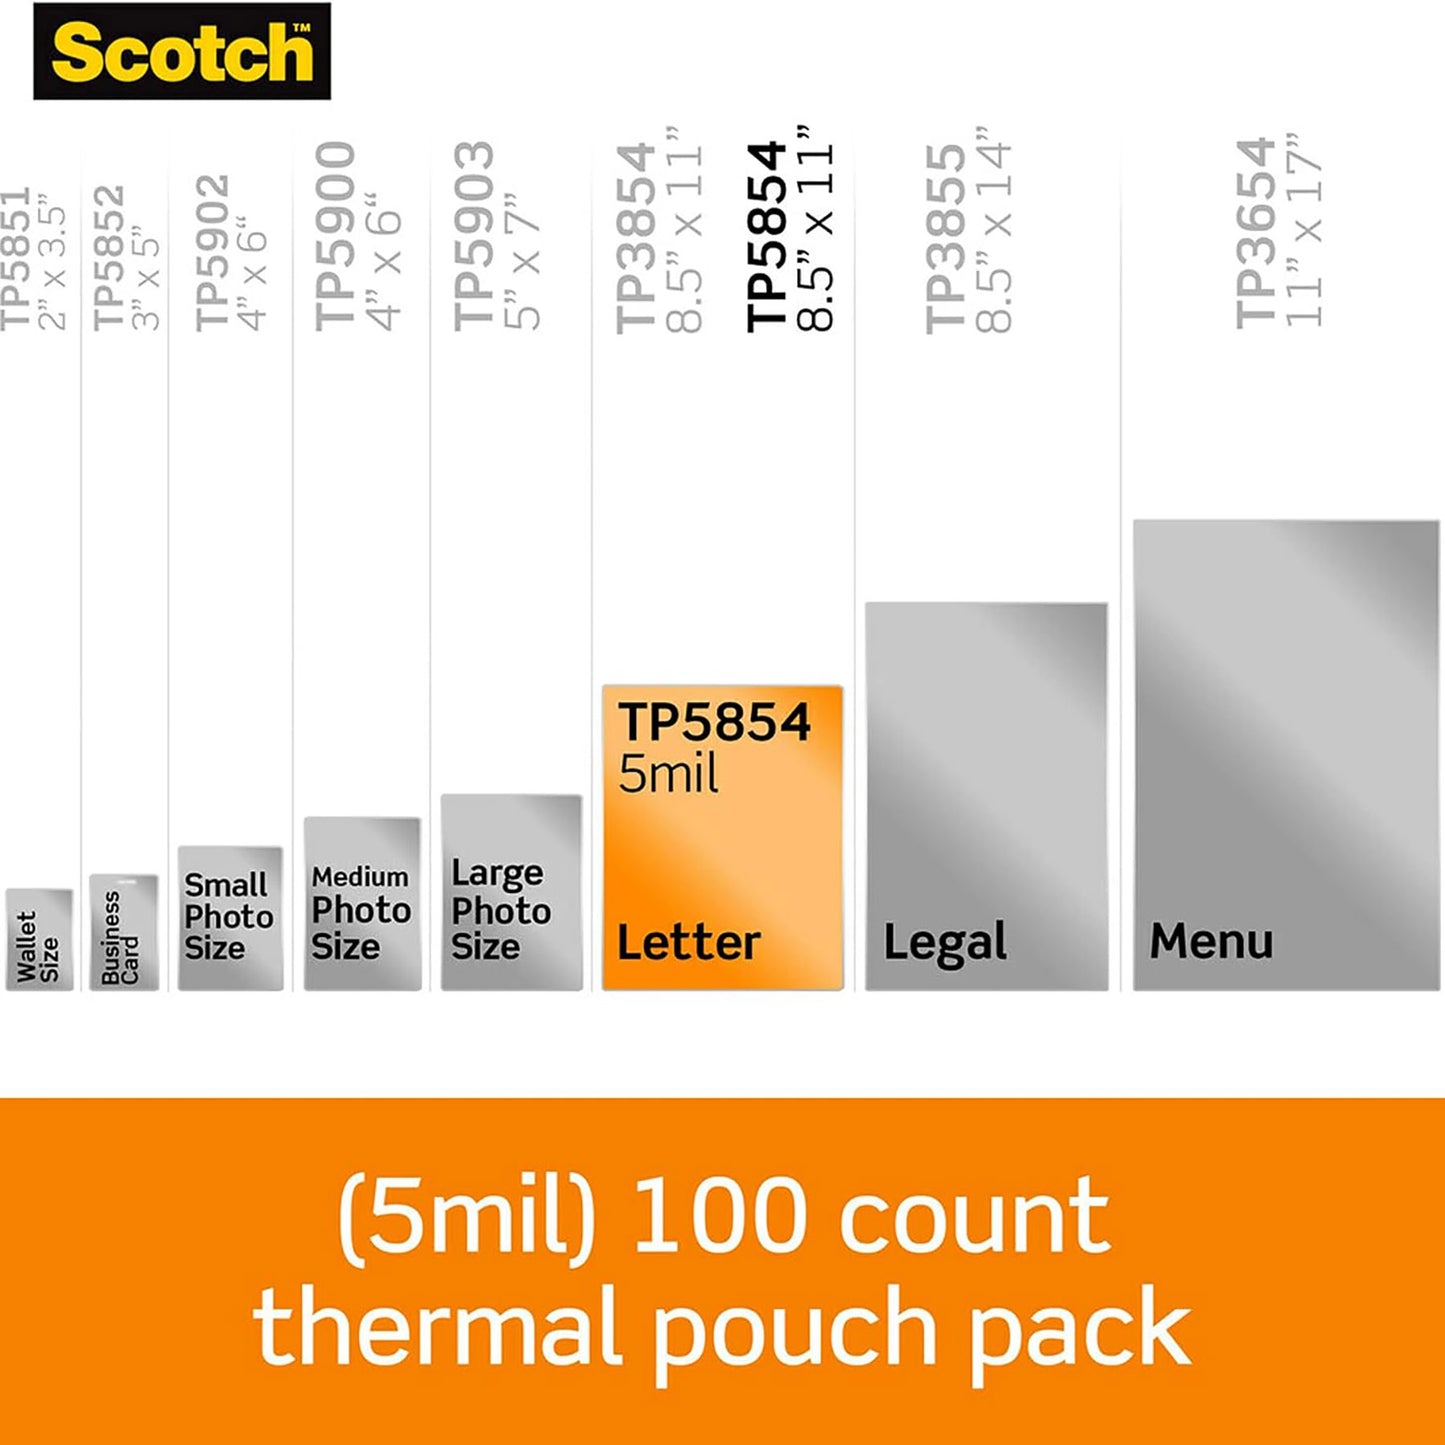 Thermal Laminating Pouches, 5 mil Size, Pack of 100